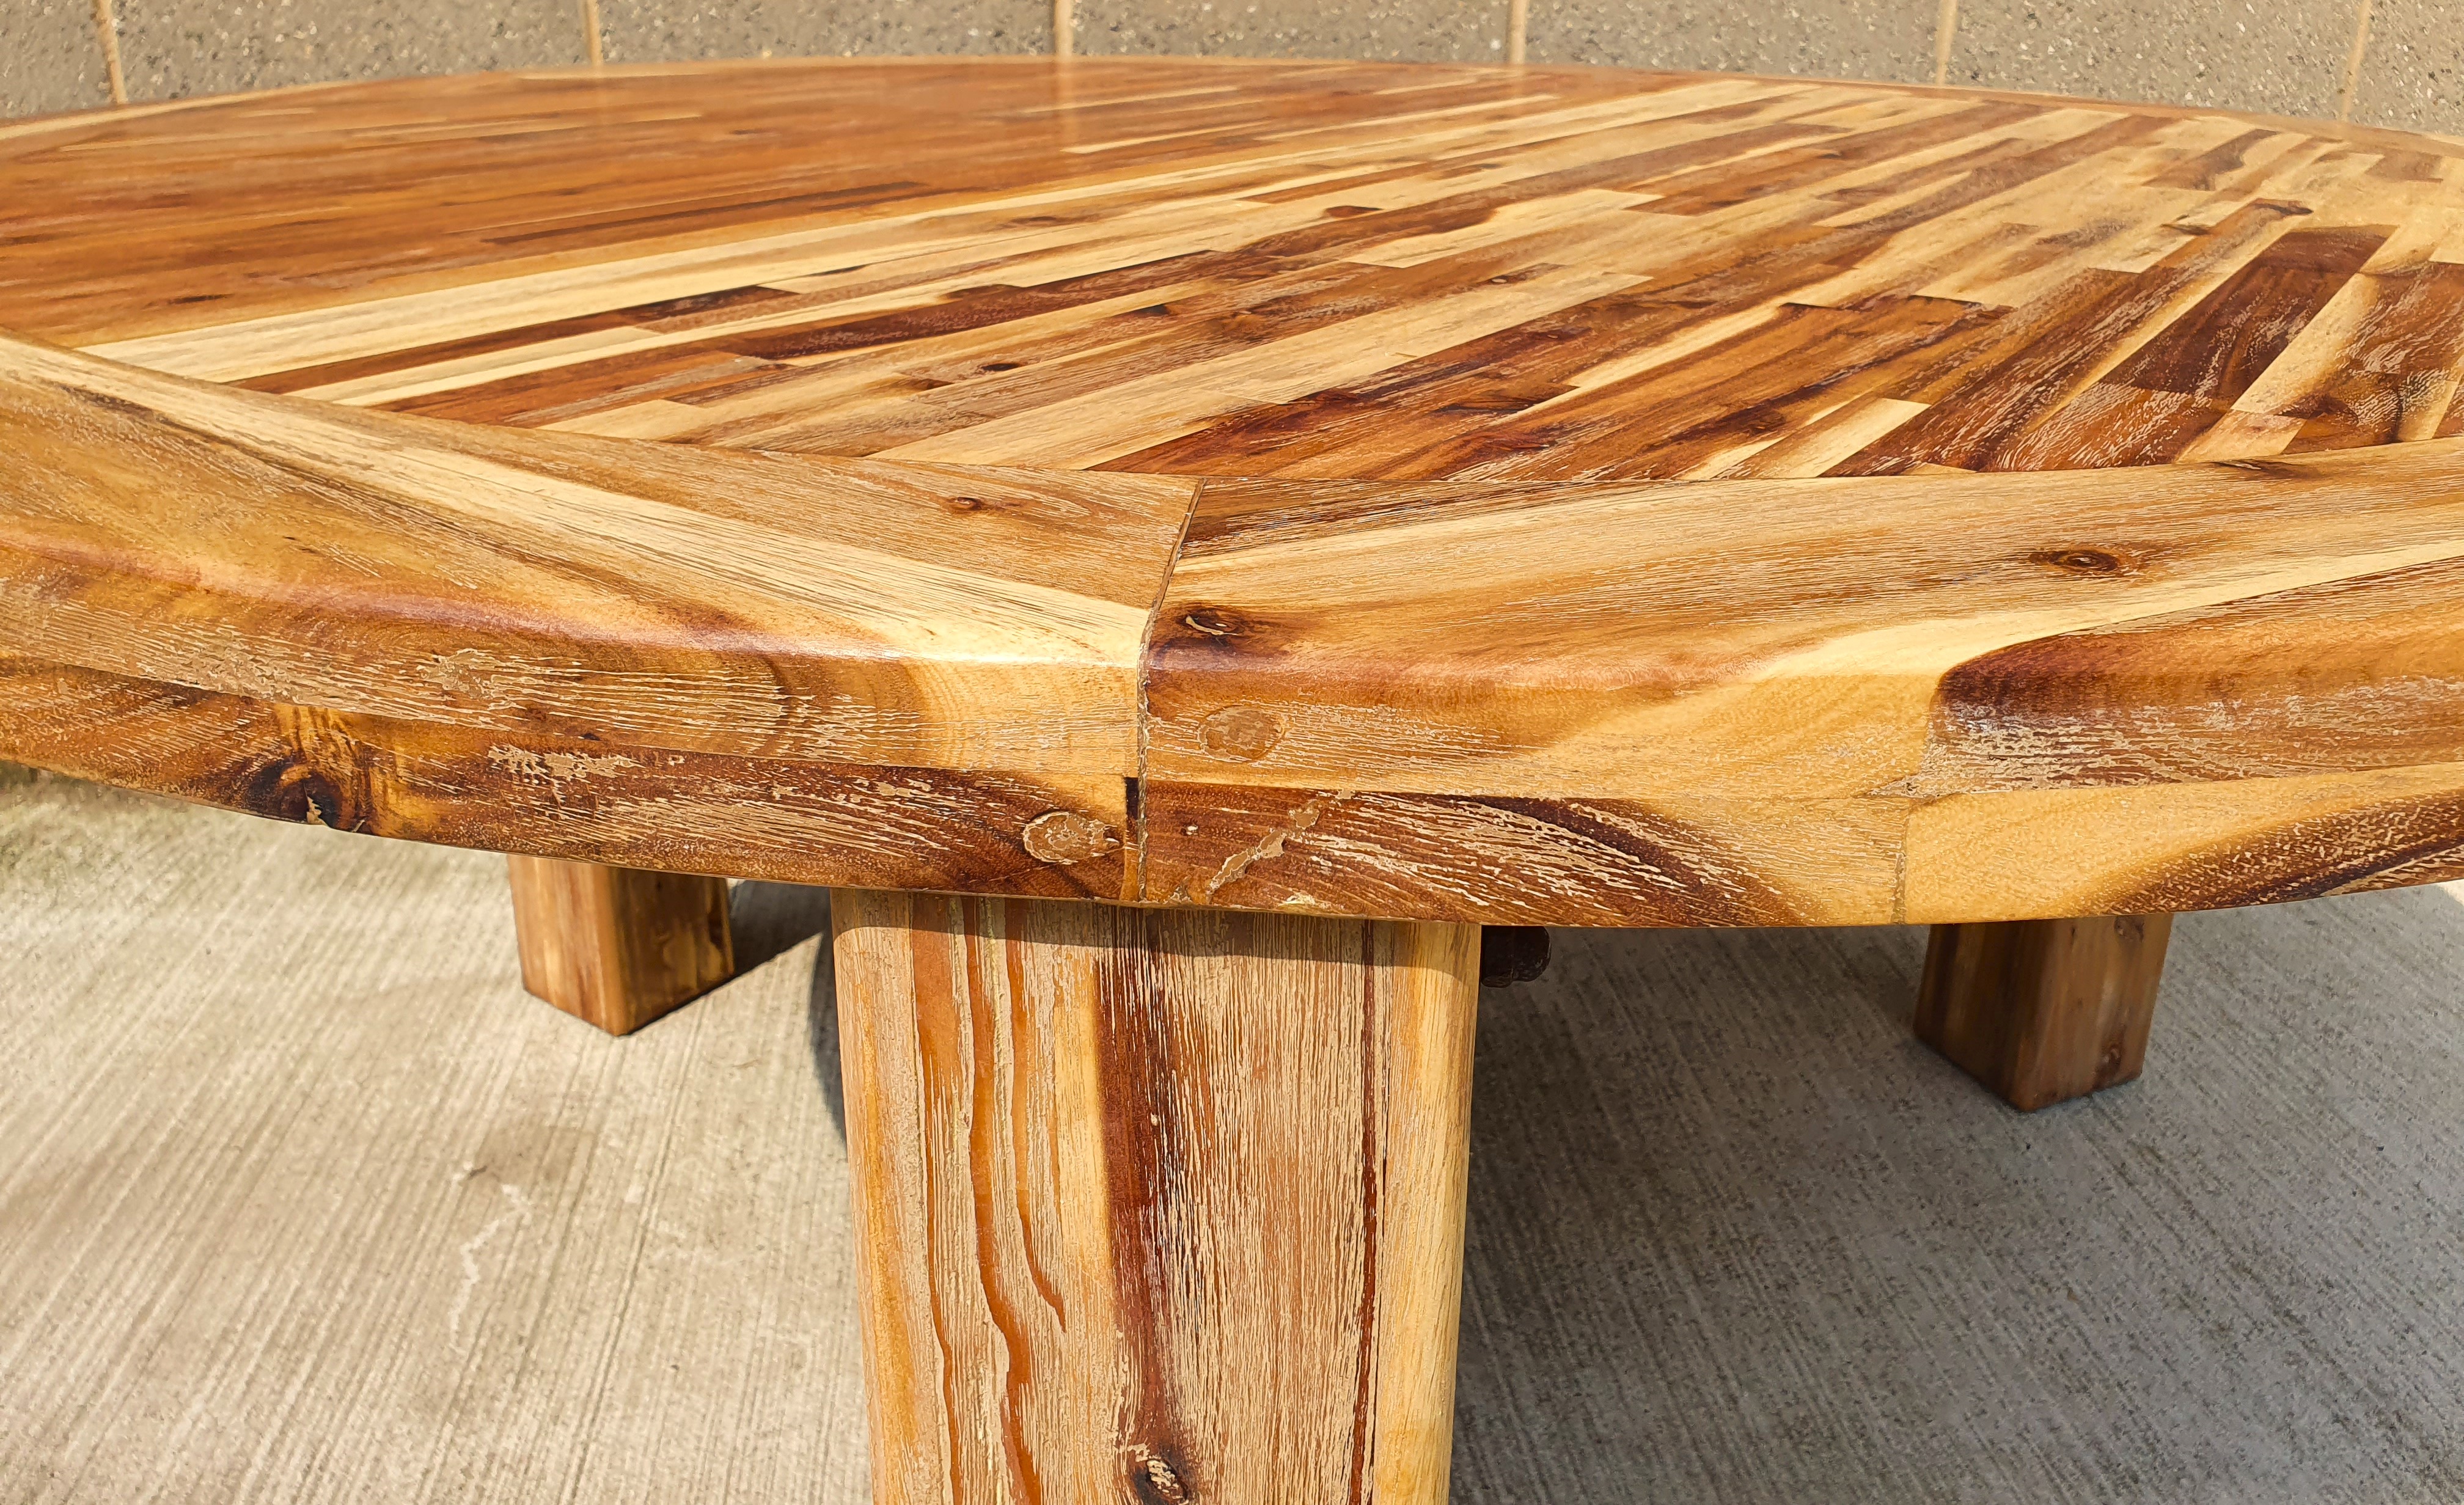 Giant Heavy Weight Solid Wood Garden Dining Table 120cm across x 80cm Tall. Rrp £1299